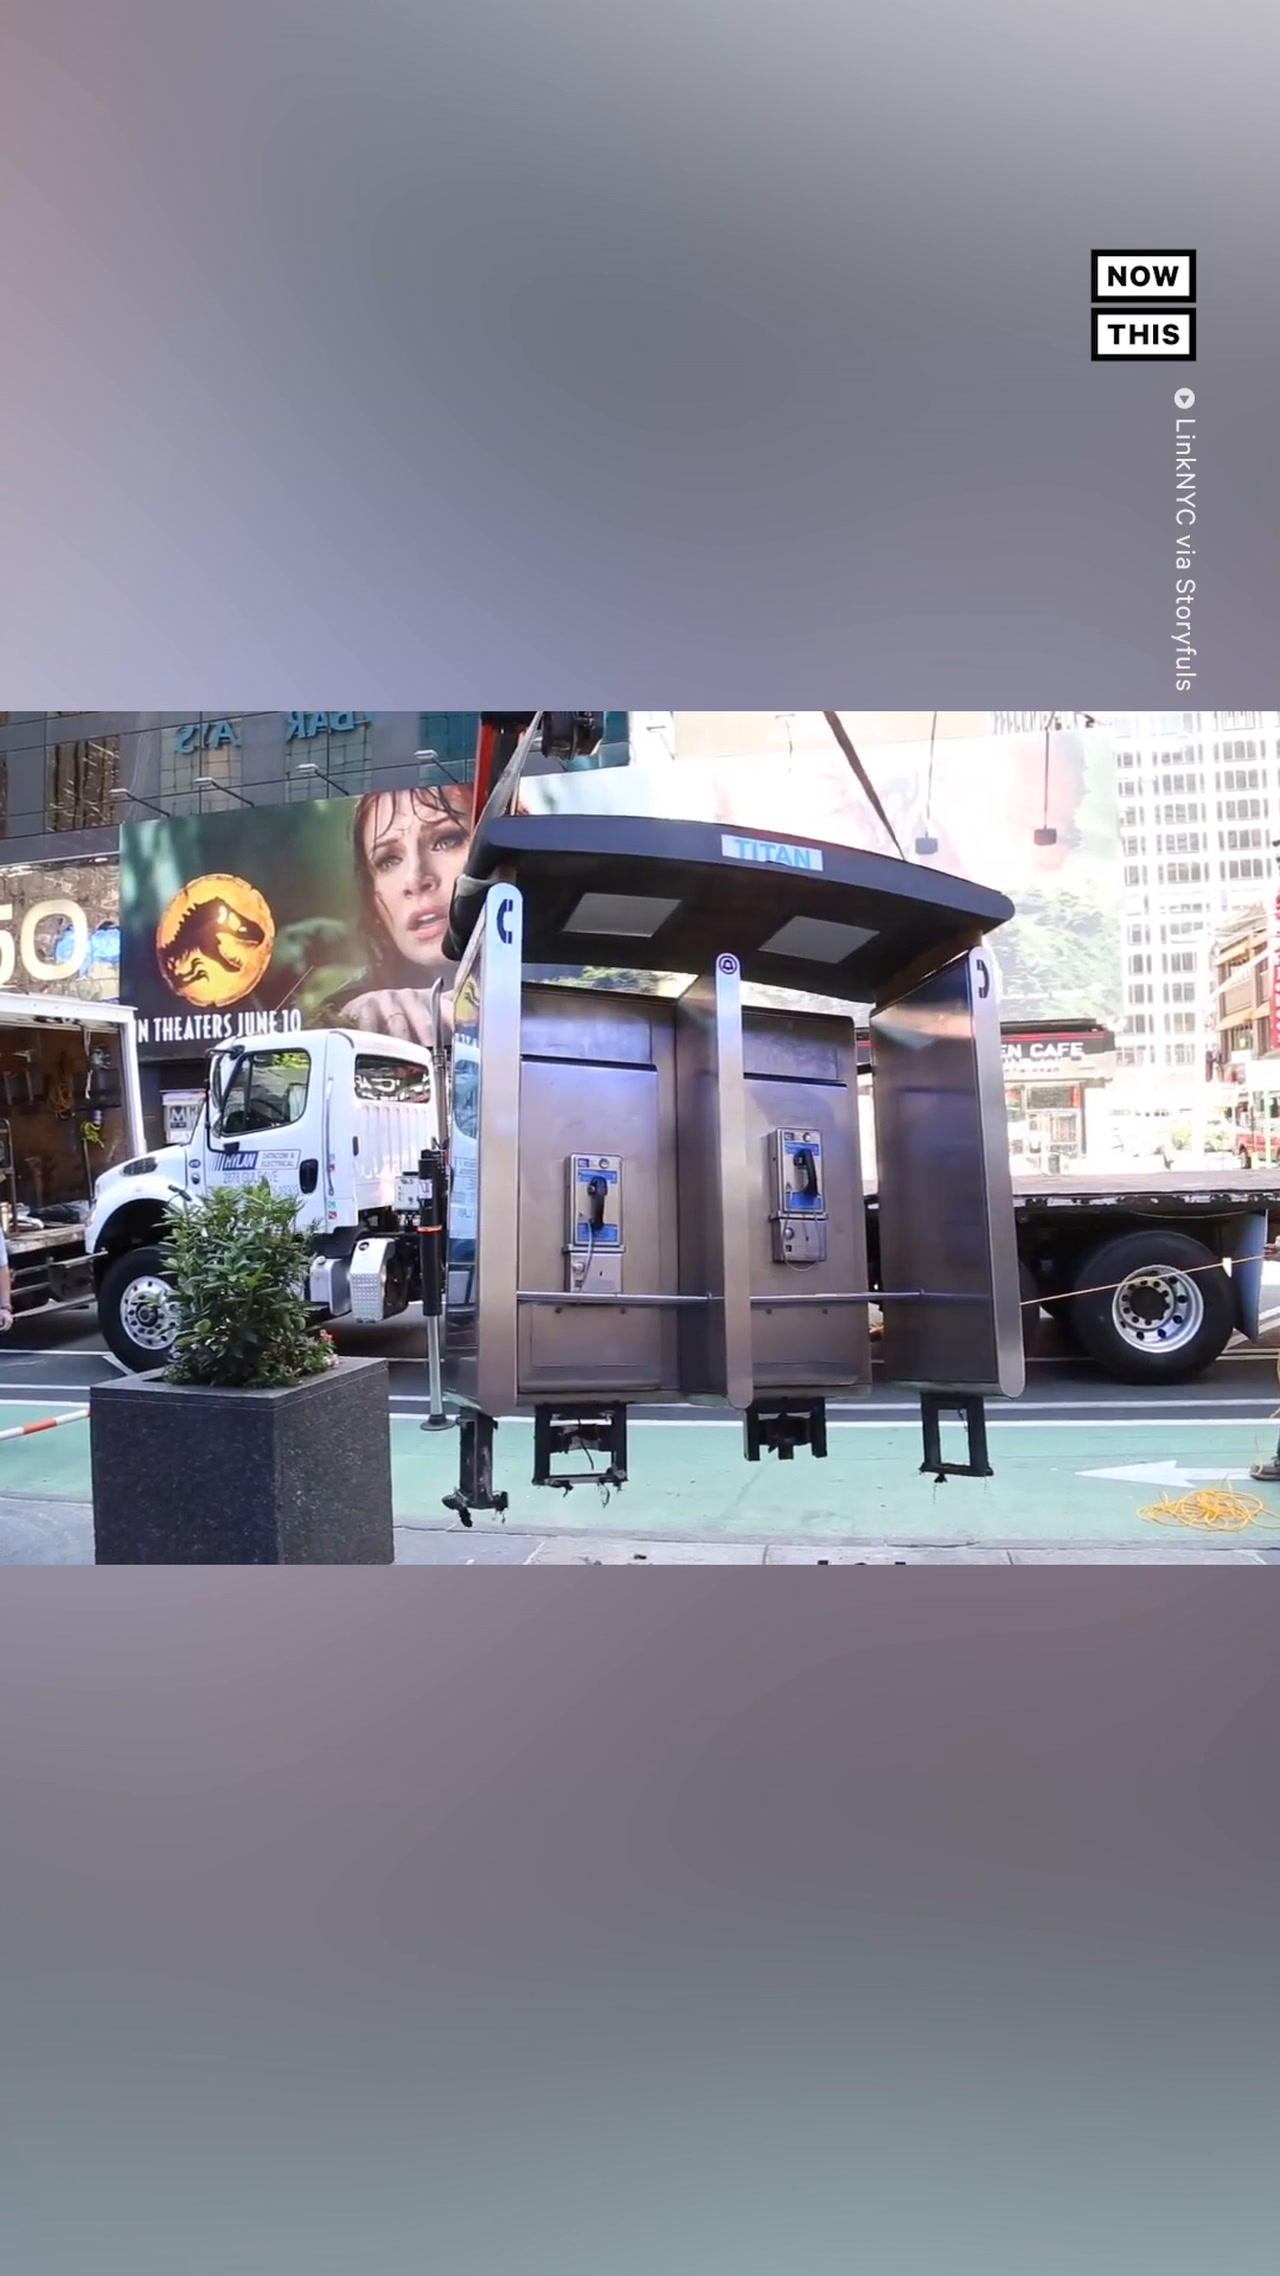 NYC Removes Its Last Payphone